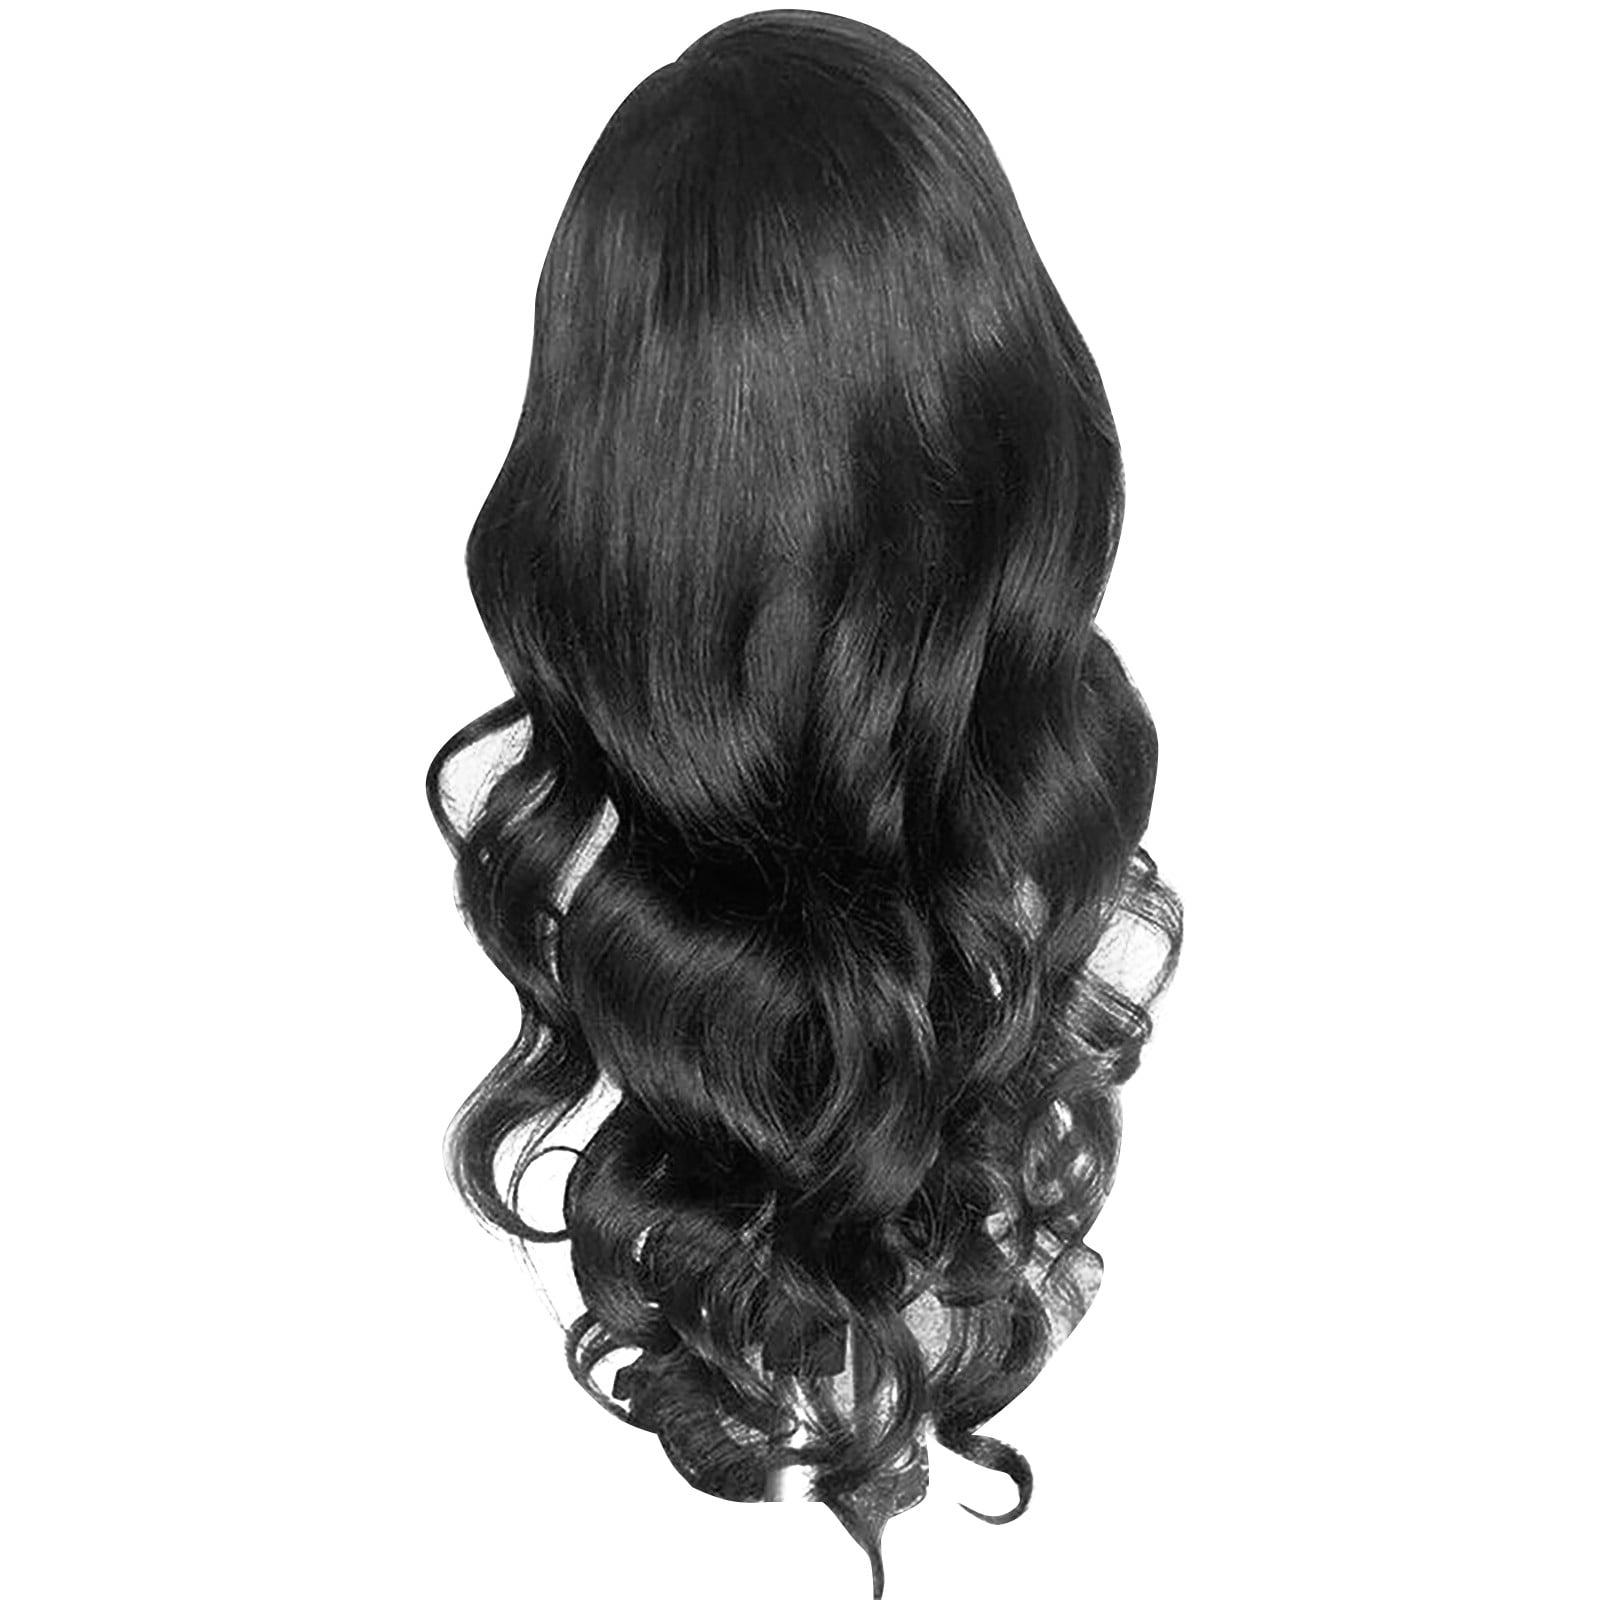 QUYUON Long Wigs for Black Women Clearance Hair Replacement Wigs Curly ...